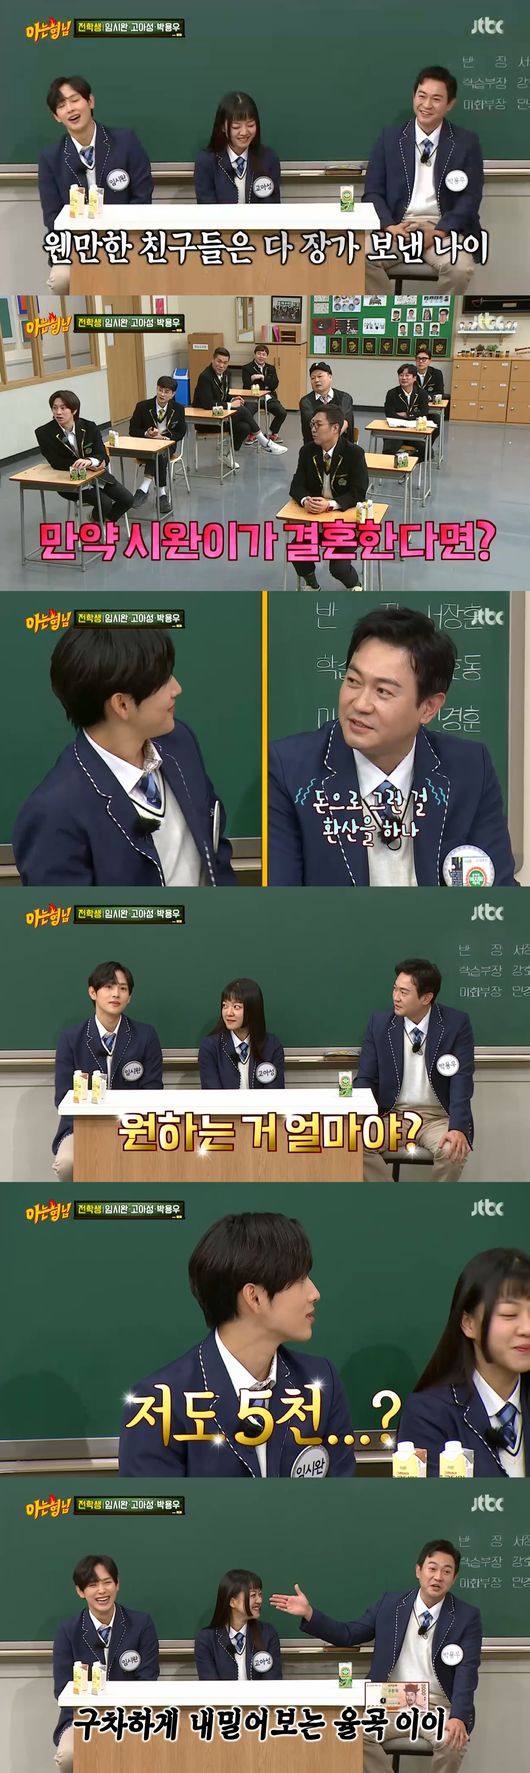 Siwan told the story of Gwang-hees 50 million won congratulatory money.In JTBC Men on a Mission broadcast on the 8th, Siwan, Go Ah-sung and Park Yong-woo of Drama Tracer appeared as transfer students, and Siwan told the story of Gwanghee.Siwan said, When Taekyeon came out, I did not talk about Captain Korea. At that time I saw MC. I am an officer, but I feel like Billon.I still remember Siwan doing really well with Cube, Kang Ho-dong said.Its not 30 seconds, but I dont do it these days, so my hand is slowing down and I think its going to take a minute, Siwan said, who attempted to match the Cube and succeeded in 33 seconds, catching the eye.Lee Sang-min asked, When Gwang-hee gets married, Siwan has a story that he receives 50 million won.Siwan said, It is a one-sided claim and I do not care much about Gwang-hee.Men on a Mission members asked Park Yong-woo, How much will Siwan pay if he gets married?Siwan hesitated and said, I am 5,000, and then he laughed around. I am a romance wedding without a congratulatory fee.Kim Hee-chul laughed, saying, I will receive everything. I will receive it all over again.Lee Jin-ho brought up the Kwang-hee story.Lee Jin-ho said, I went to a shop like Gwanghee, and Gwanghee asked me about the schedule of the entertainers in the shop. He said, There is a meeting that loves Park Jae-seok.The representative is Haha type. Haha type said that Park Jae-seok is favoring Yongjin these days, but he knew Yongjin as me and checked me. On this day, Go Ah-sung caught the eye by saying that his nickname was Ulabullah Blue Chan: a childrens program that Go Ah-sung made in the past.Men on a Mission members who saw the photo at the time said, It is the most cute picture in the past.Go Ah-sung talked about the film Monster shooting scene in the past.Go Ah-sung said, I did not know it was a sad scene when I was a child. I lost my family and I was so tired of finding me, so I ate rice.I didnt know it then, but when I grew up, I was so sad. Go Ah-sung said, When I was a child, I received a portrait of the portrait from Monster. Now that I was older, it was meaningful to see the portrait.Since then, I have taken meaningful props every time I shoot, he said. When I act as a worker, I always take a employee ID. 